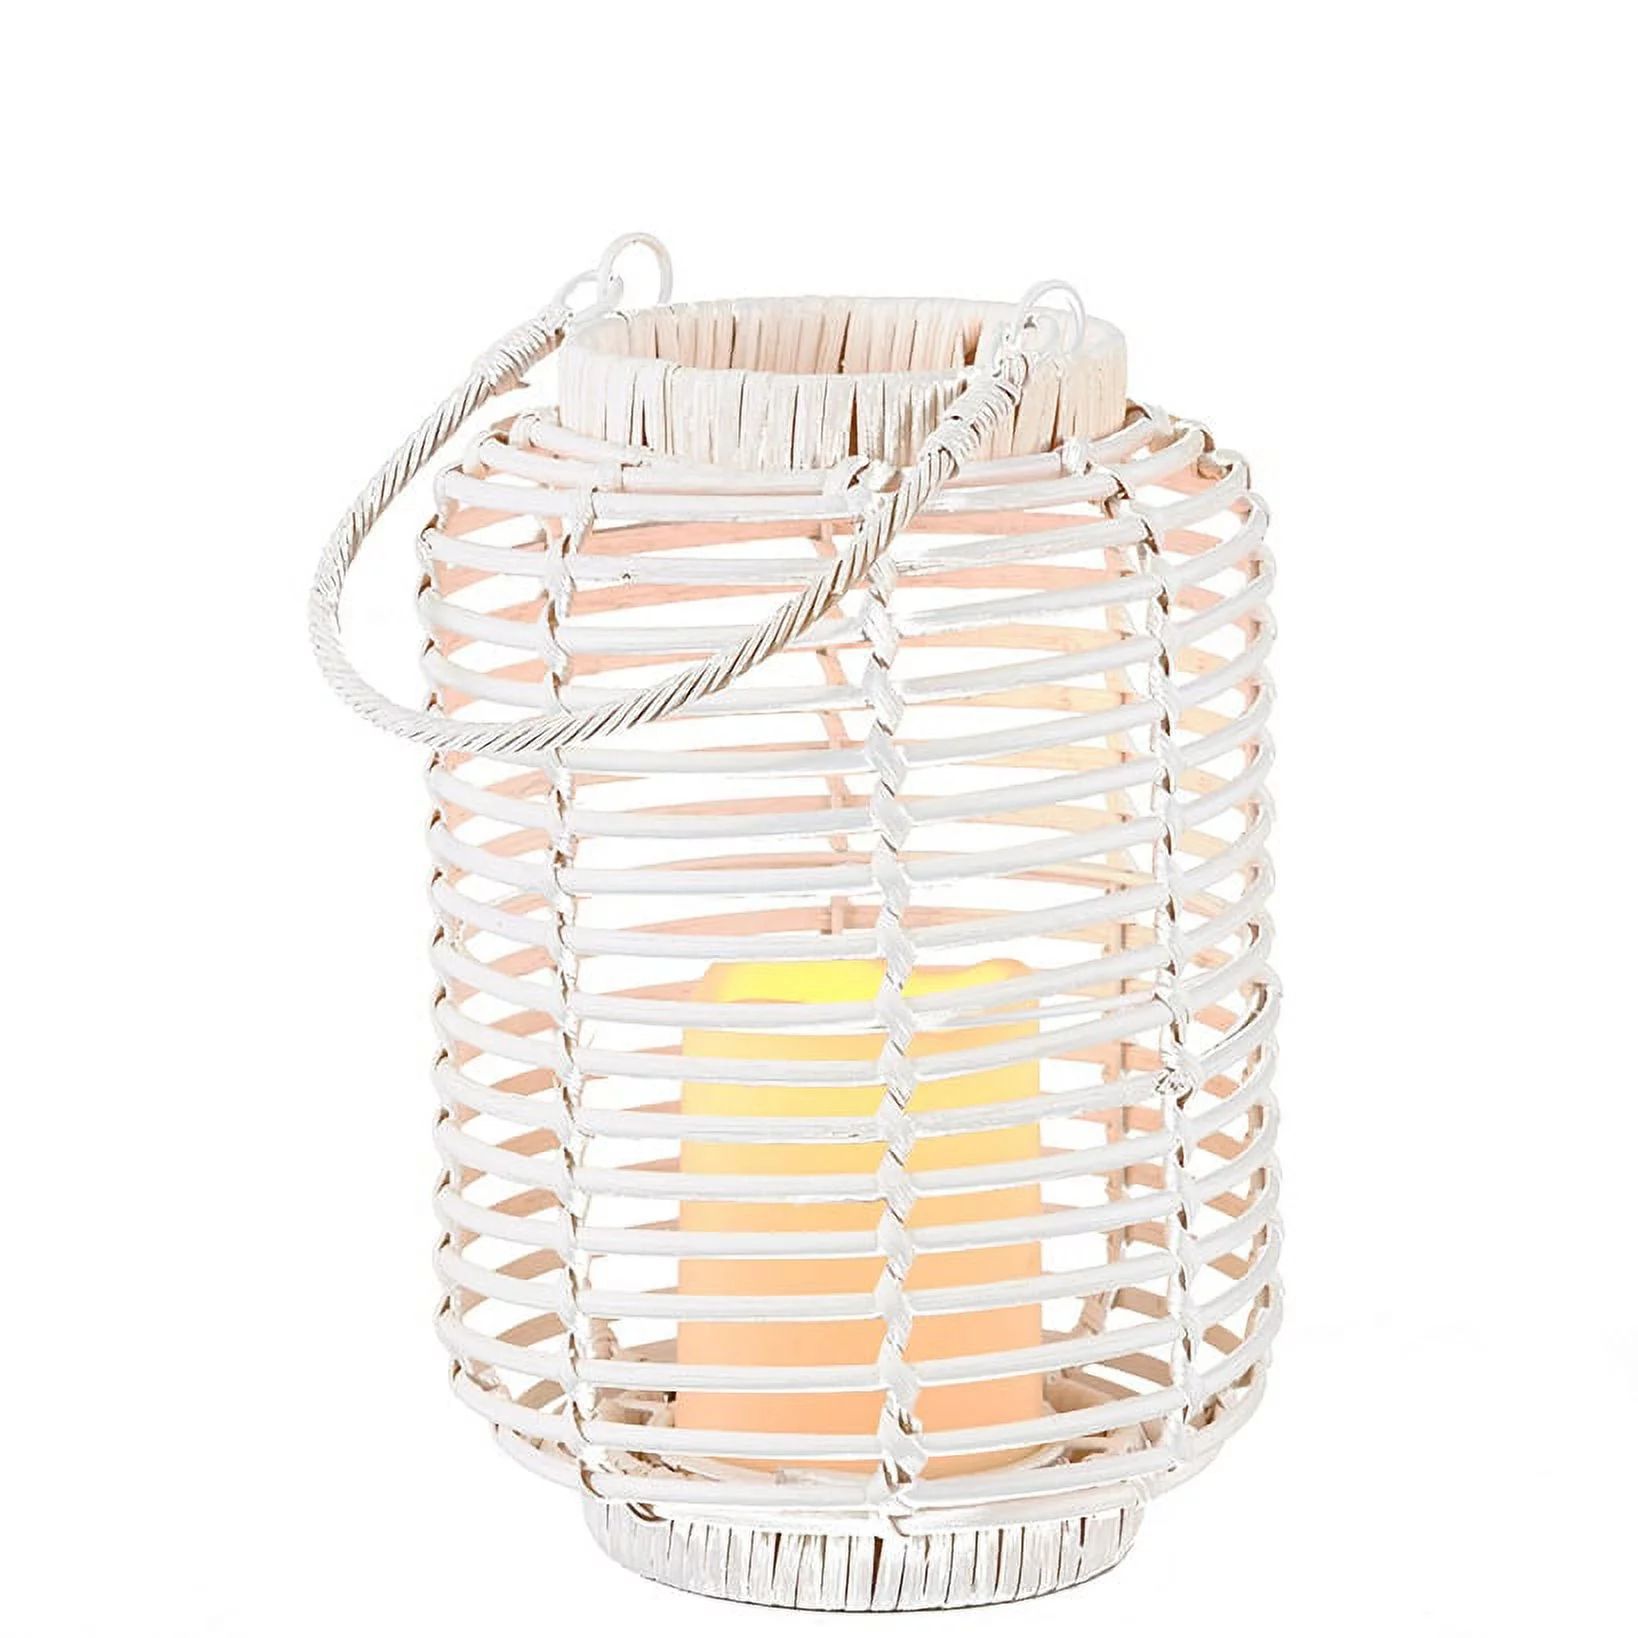 Wicker and Rattan LED Candle Lantern with Cage Look - White - Medium | Walmart (US)